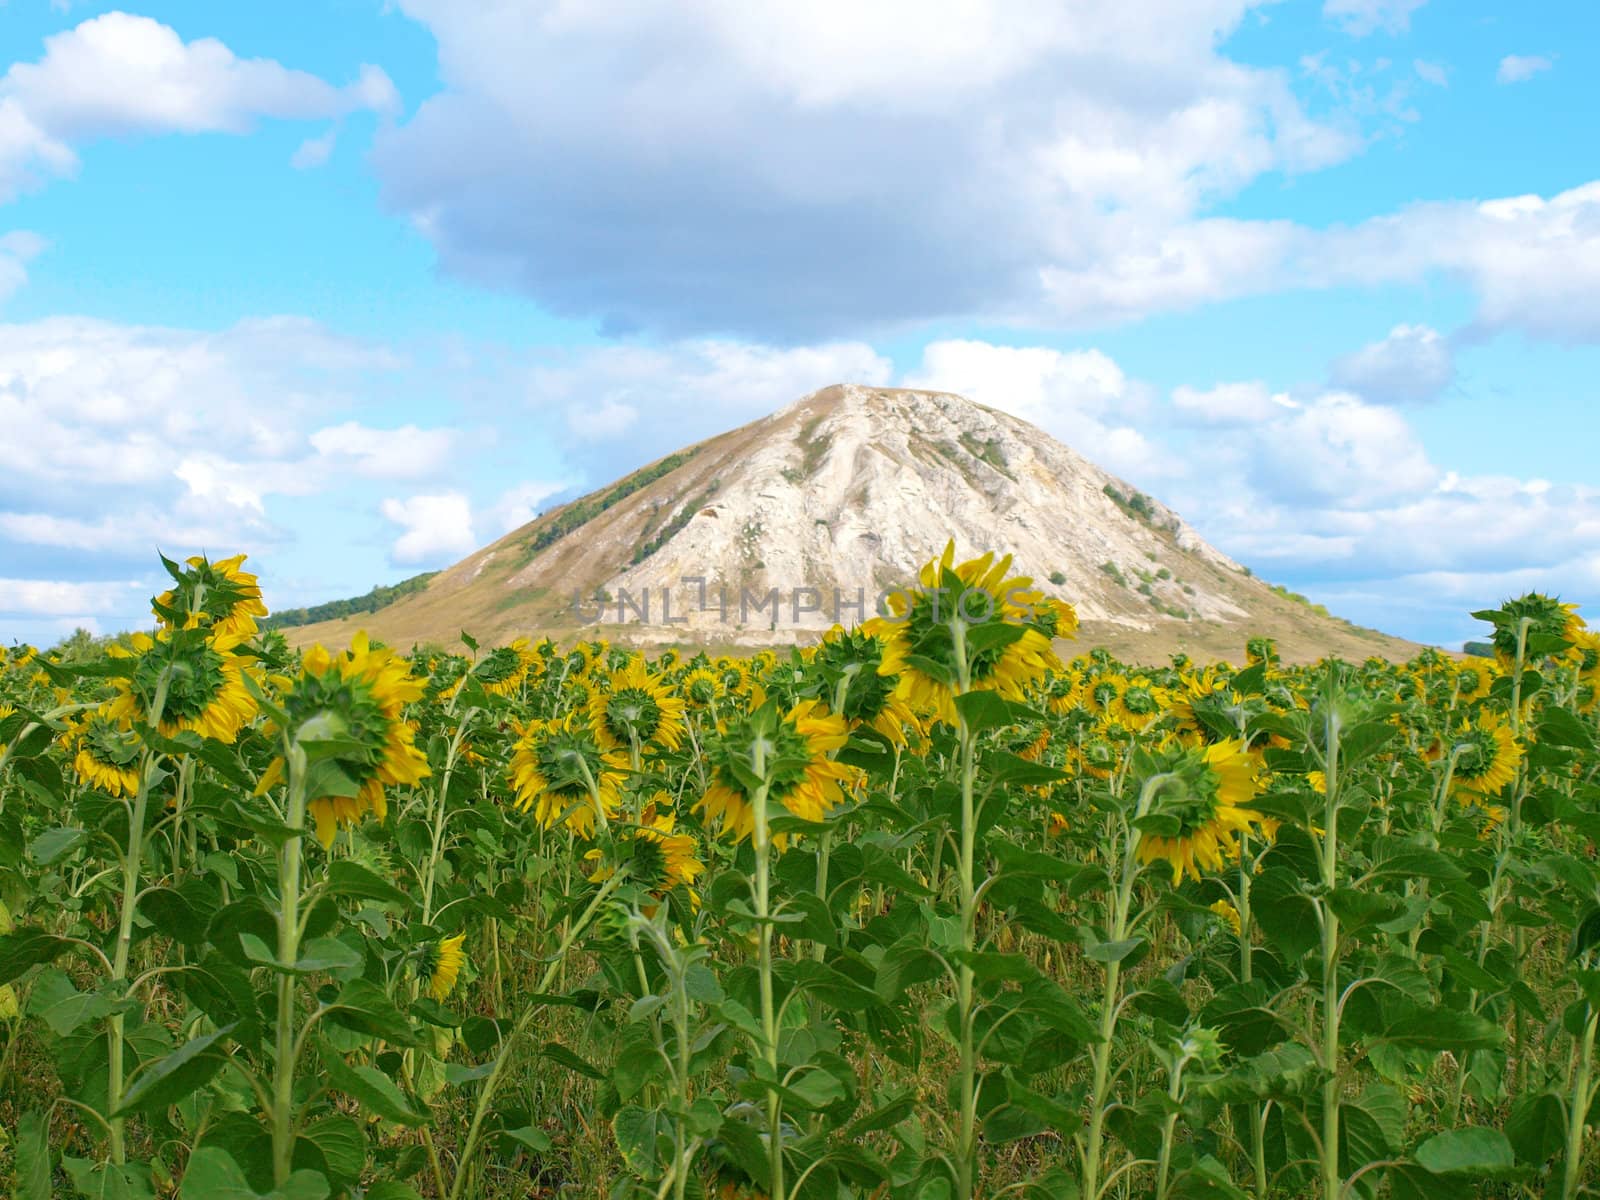 Sunflowers field under the hill by sergpet